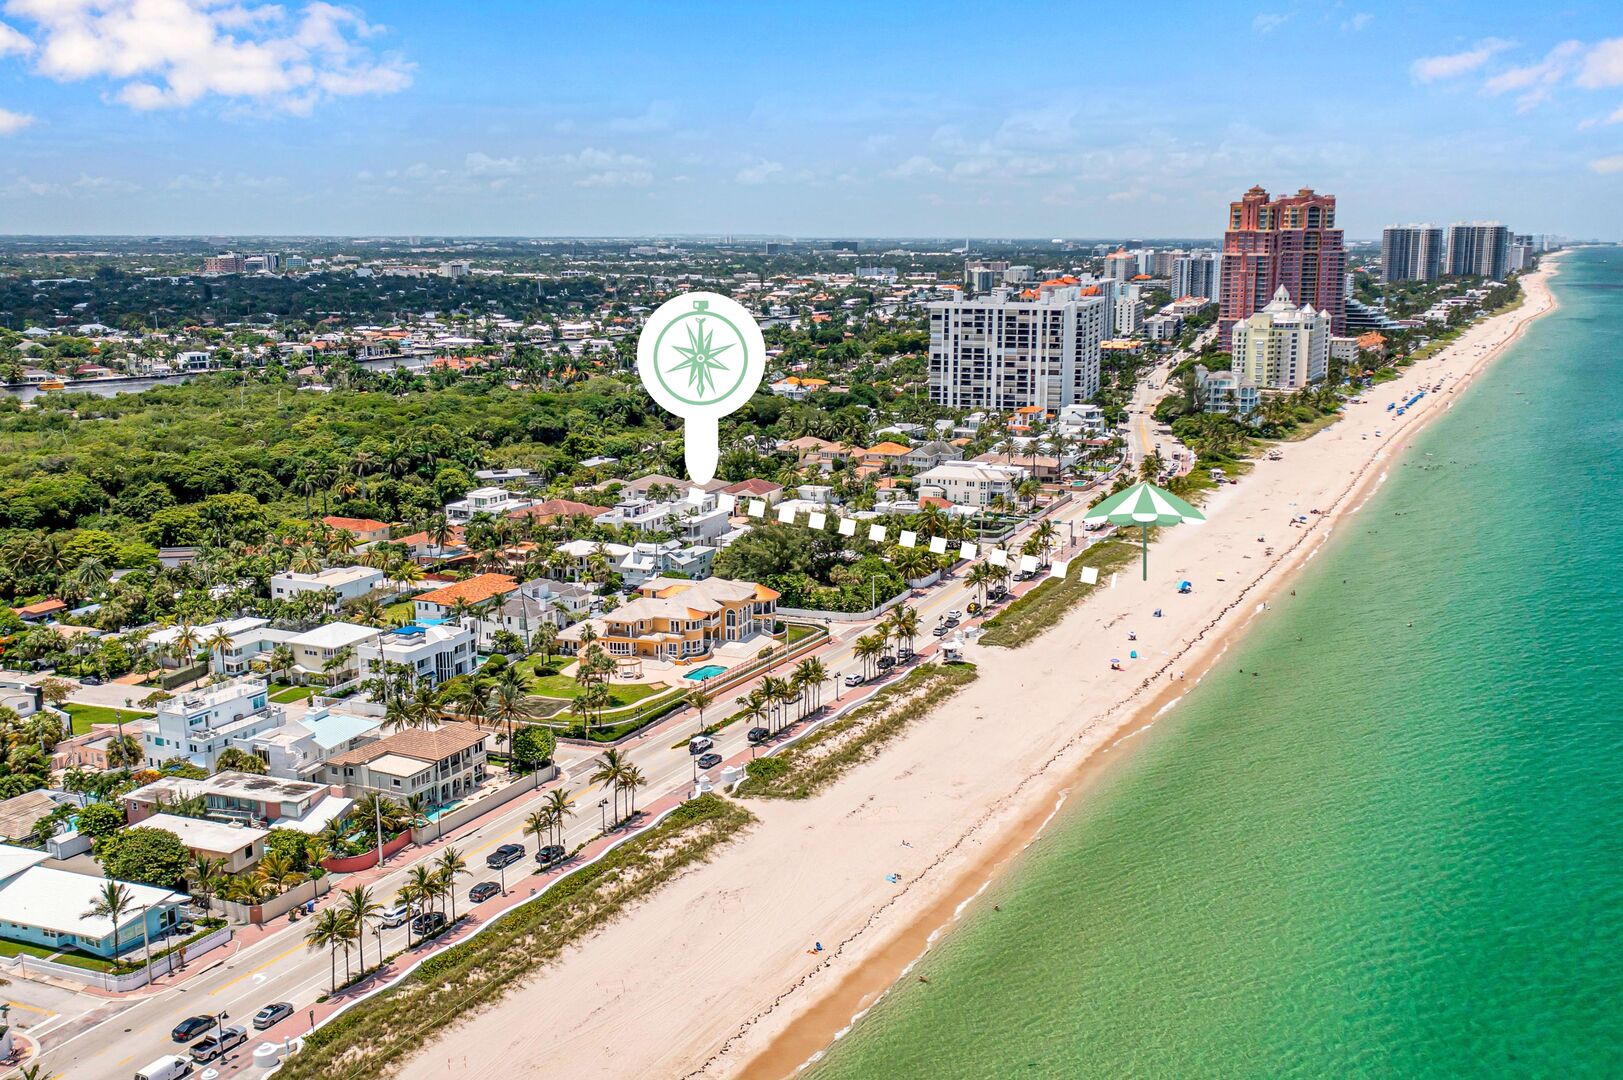 Embrace the epitome of coastal living, with the beach only 300 feet away - a mere stroll that transports you to a world of sun, sand, and endless seaside adventures.